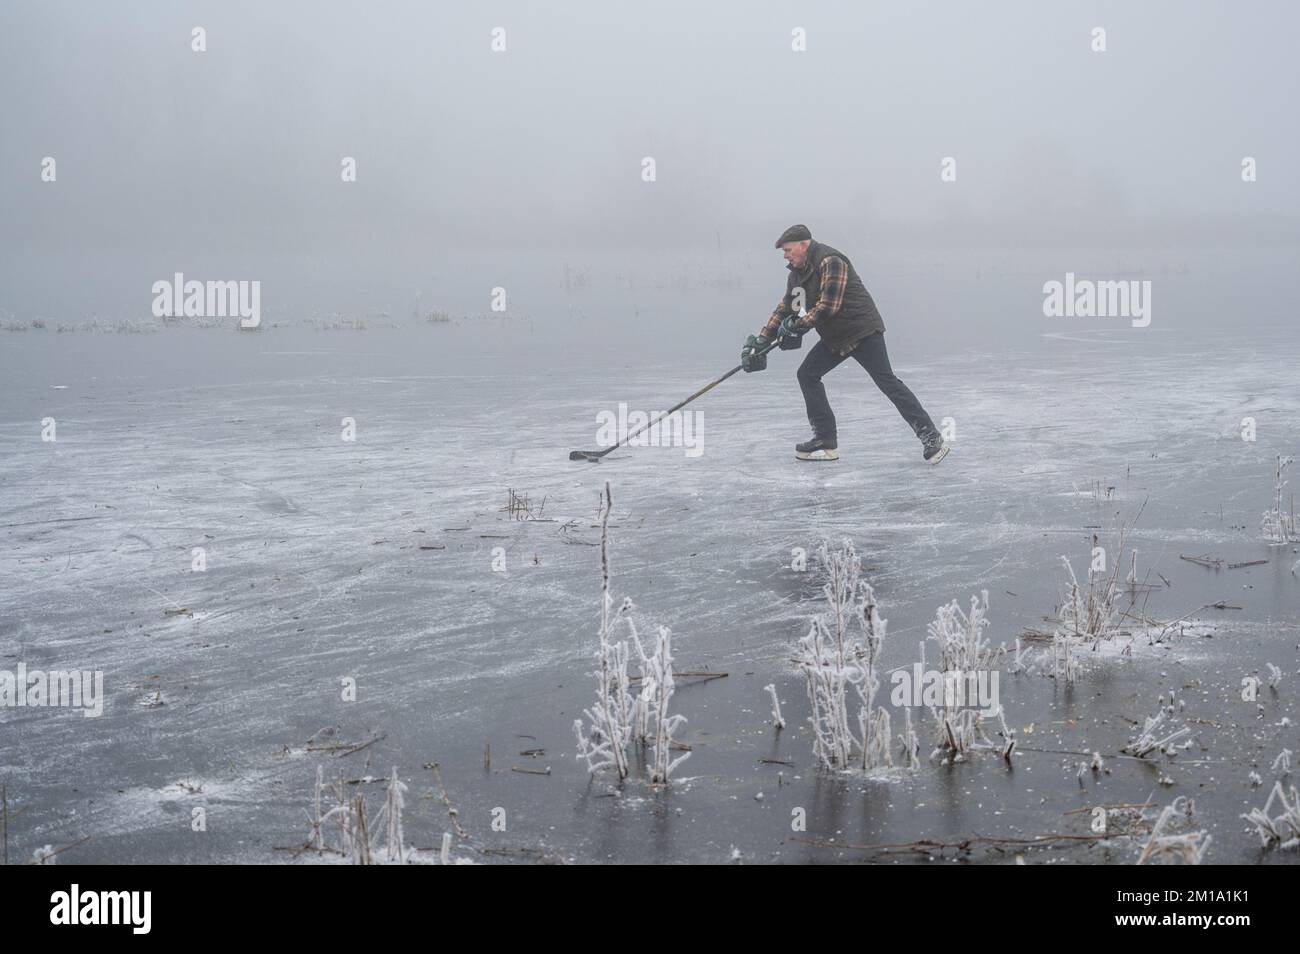 Bluntisham, Cambridgeshire, UK. 11th Dec, 2022. People make the most of the freezing weather skating on the frozen fen washes in freezing fog. After several days of sub zero temperatures the winter weather has allowed the shallow fenland water to freeze over to allow outdoor fen skating. The cold snap is forecast to last into the coming week. Credit: Julian Eales/Alamy Live News Stock Photo